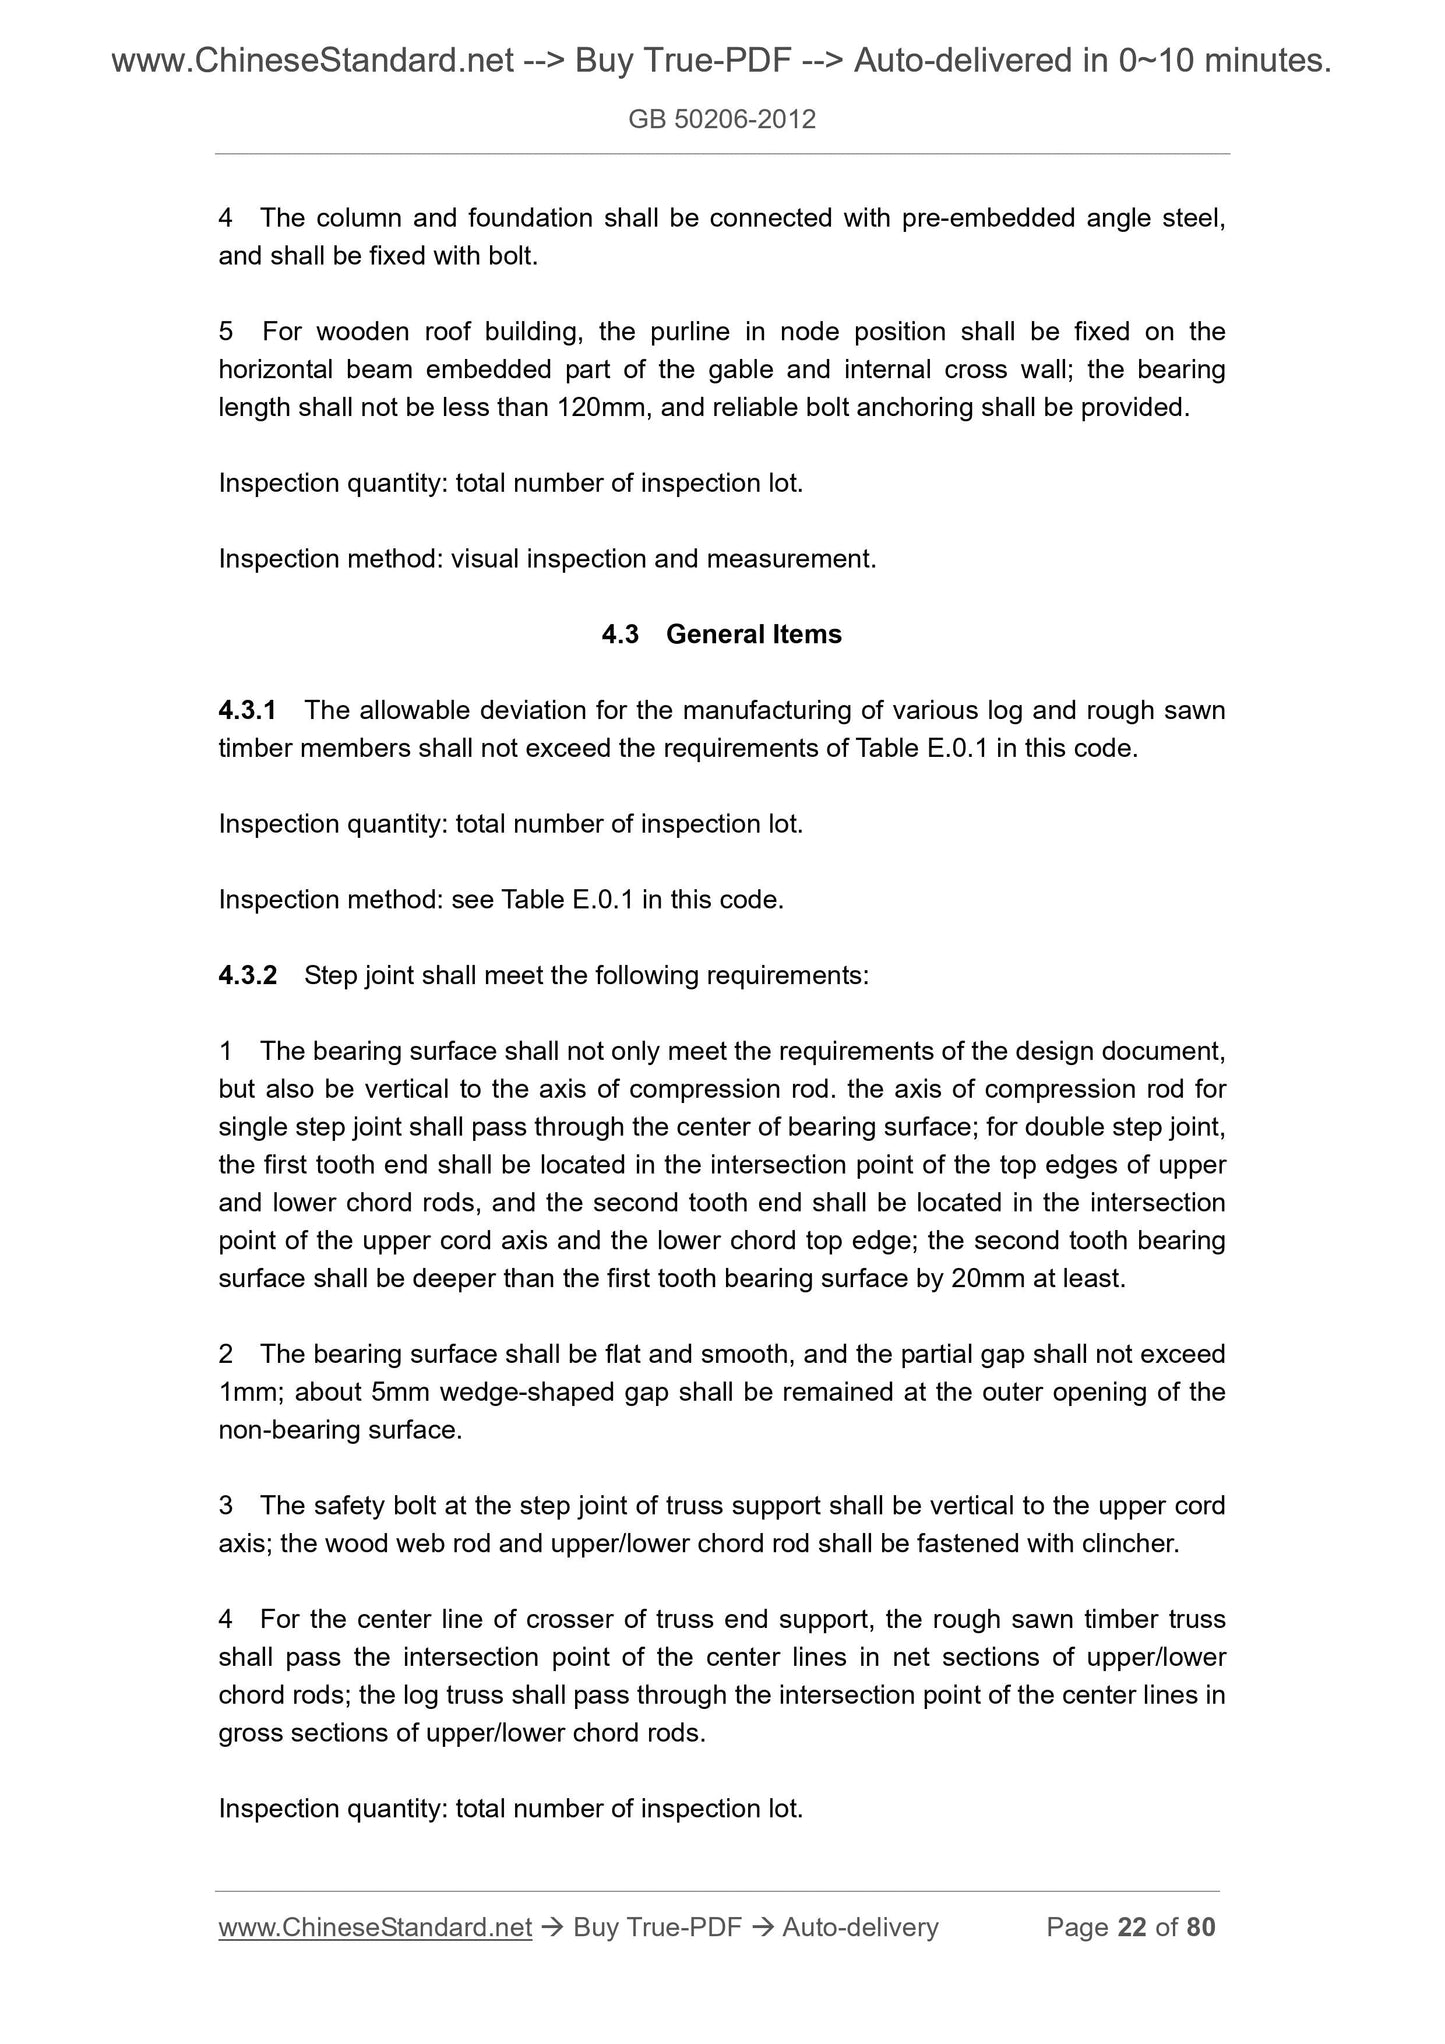 GB 50206-2012 Page 11